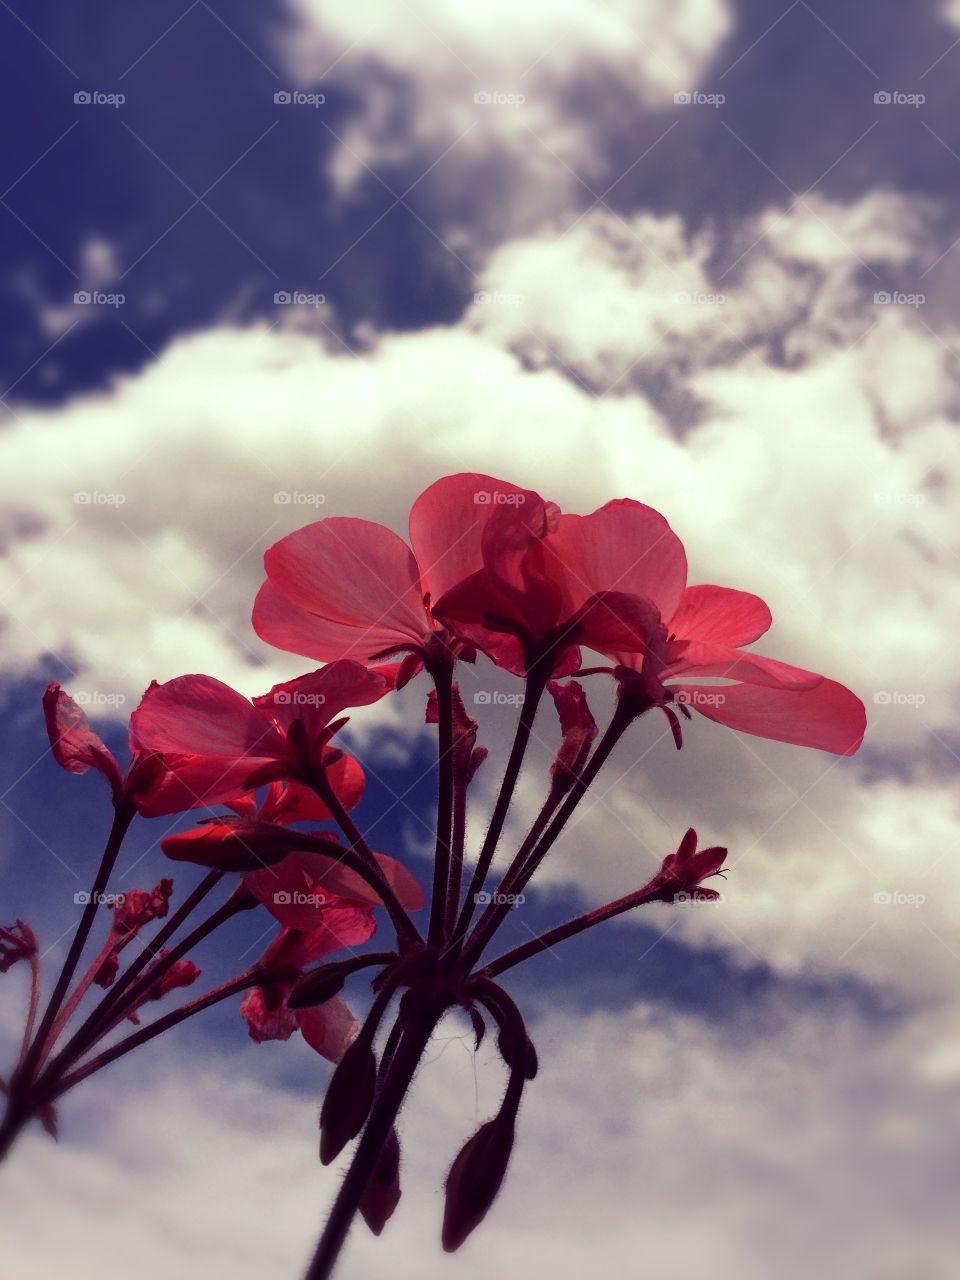 This is a pink flower with the sky as the background. This photo shows land as well as sky.